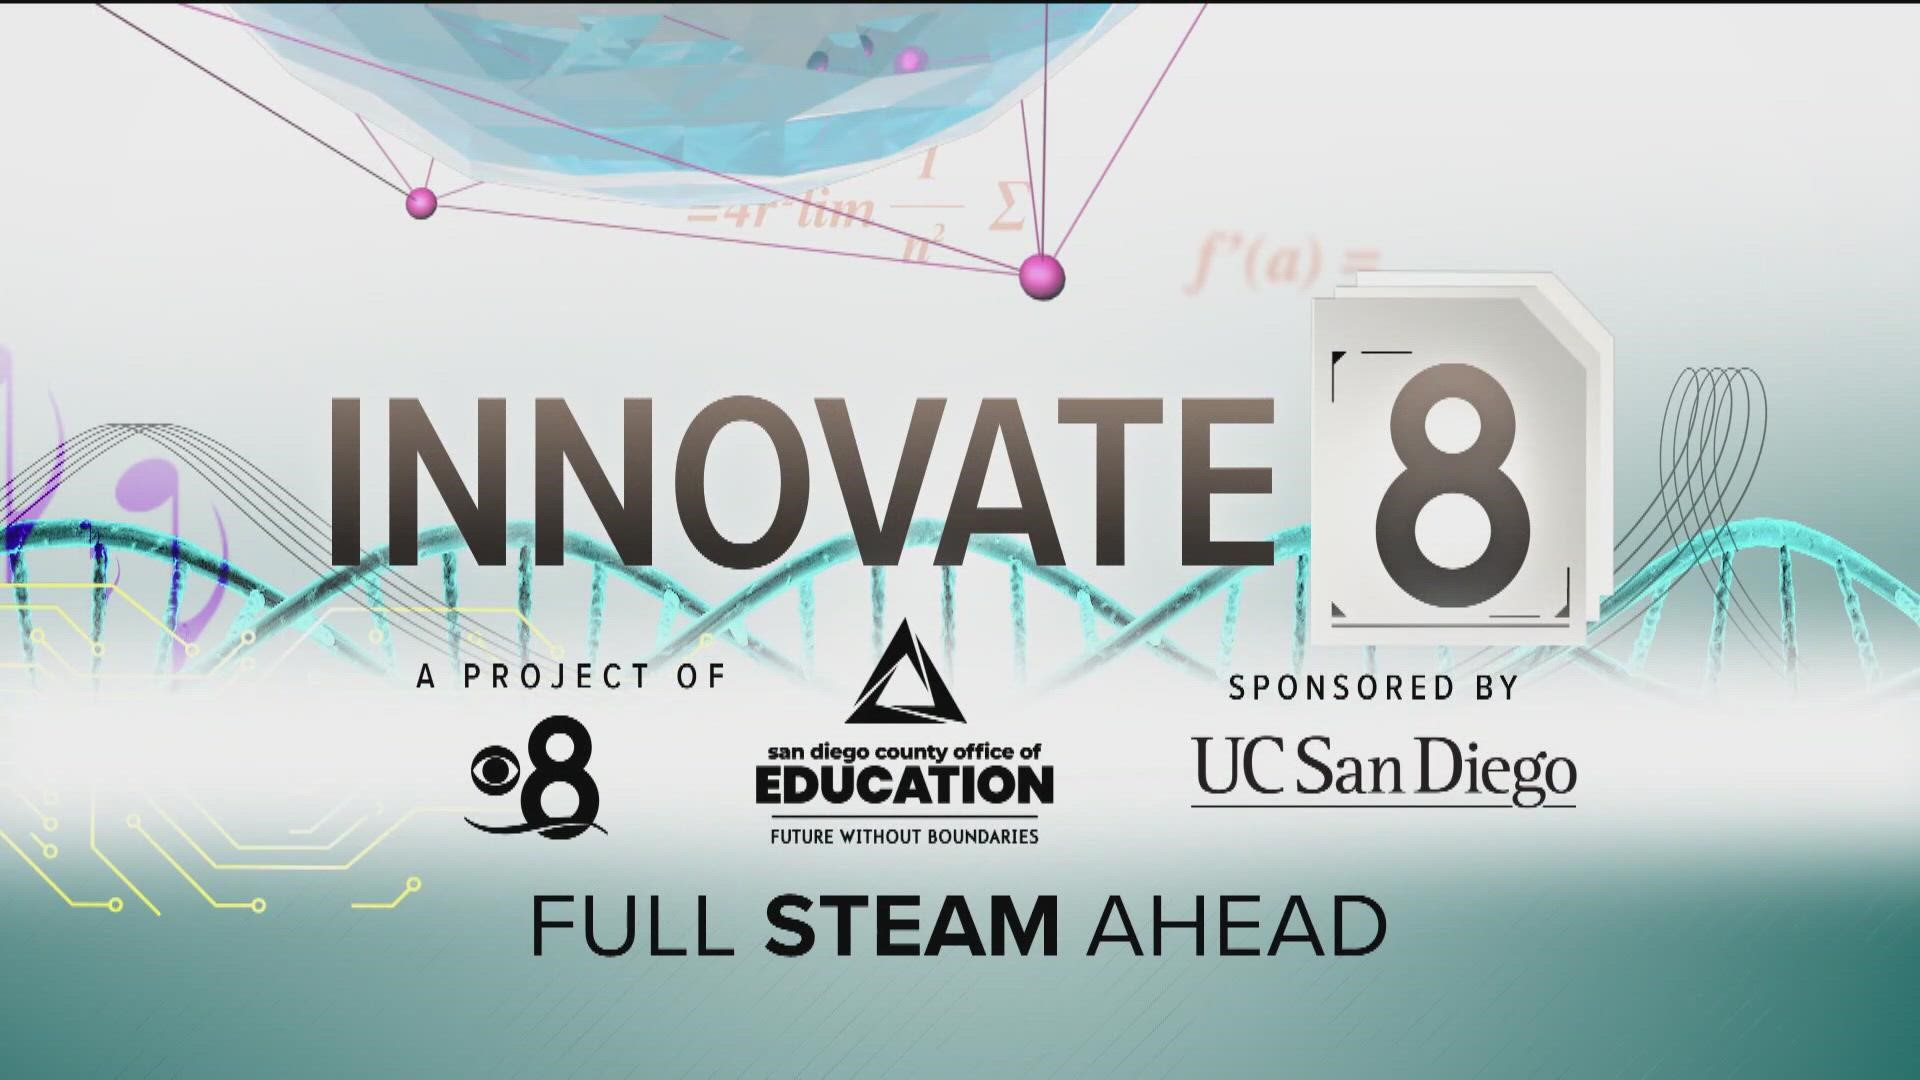 Full STEAM Ahead! Why San Diego is at the leading edge of technology and innovation in Science, Technology, Art, Engineering and Math.